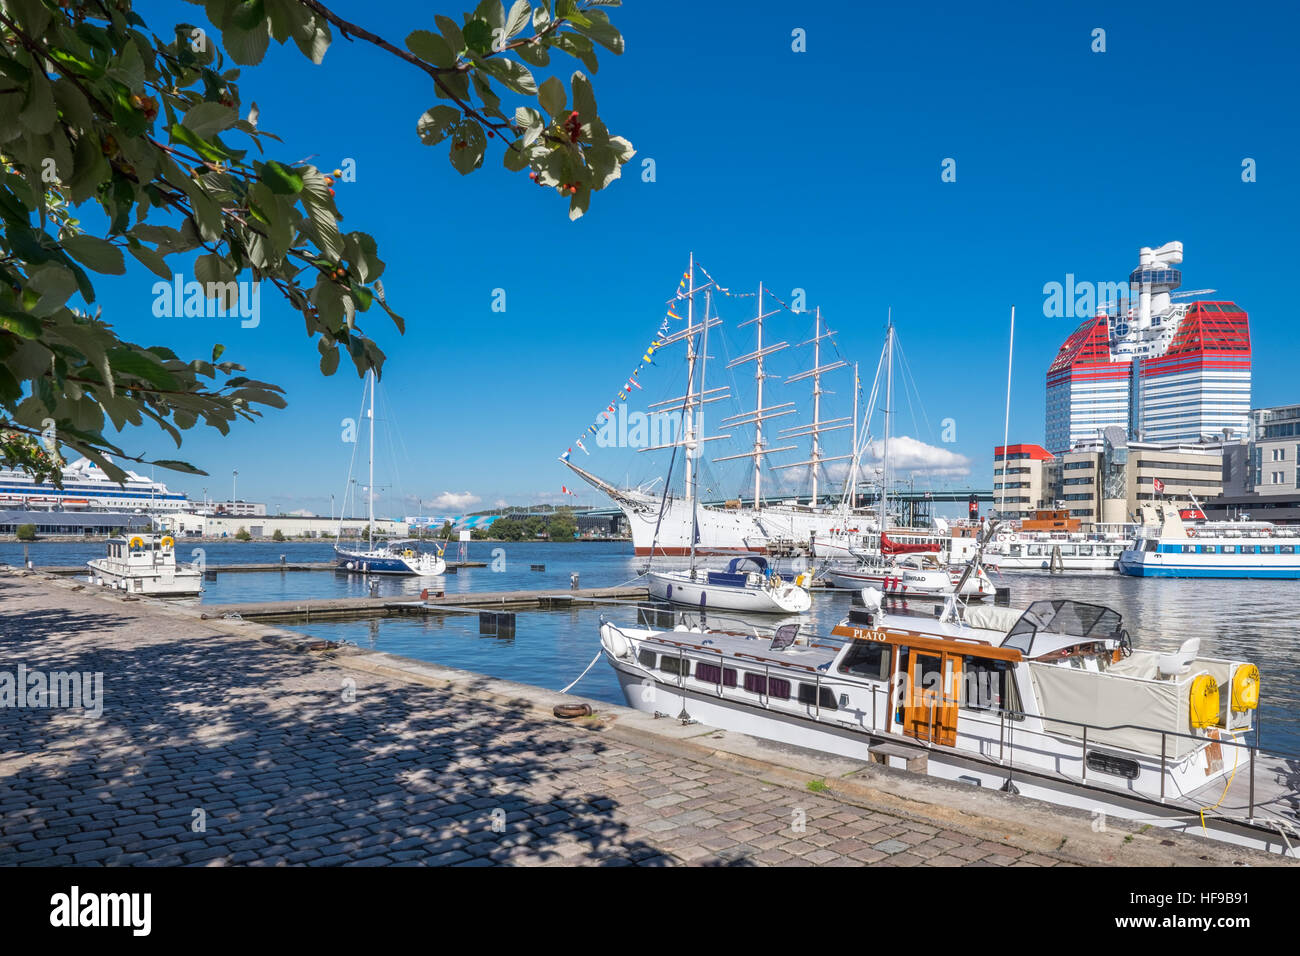 Lilla bommen harbor with famous ship Viking in Gothenburg, Sweden Stock Photo